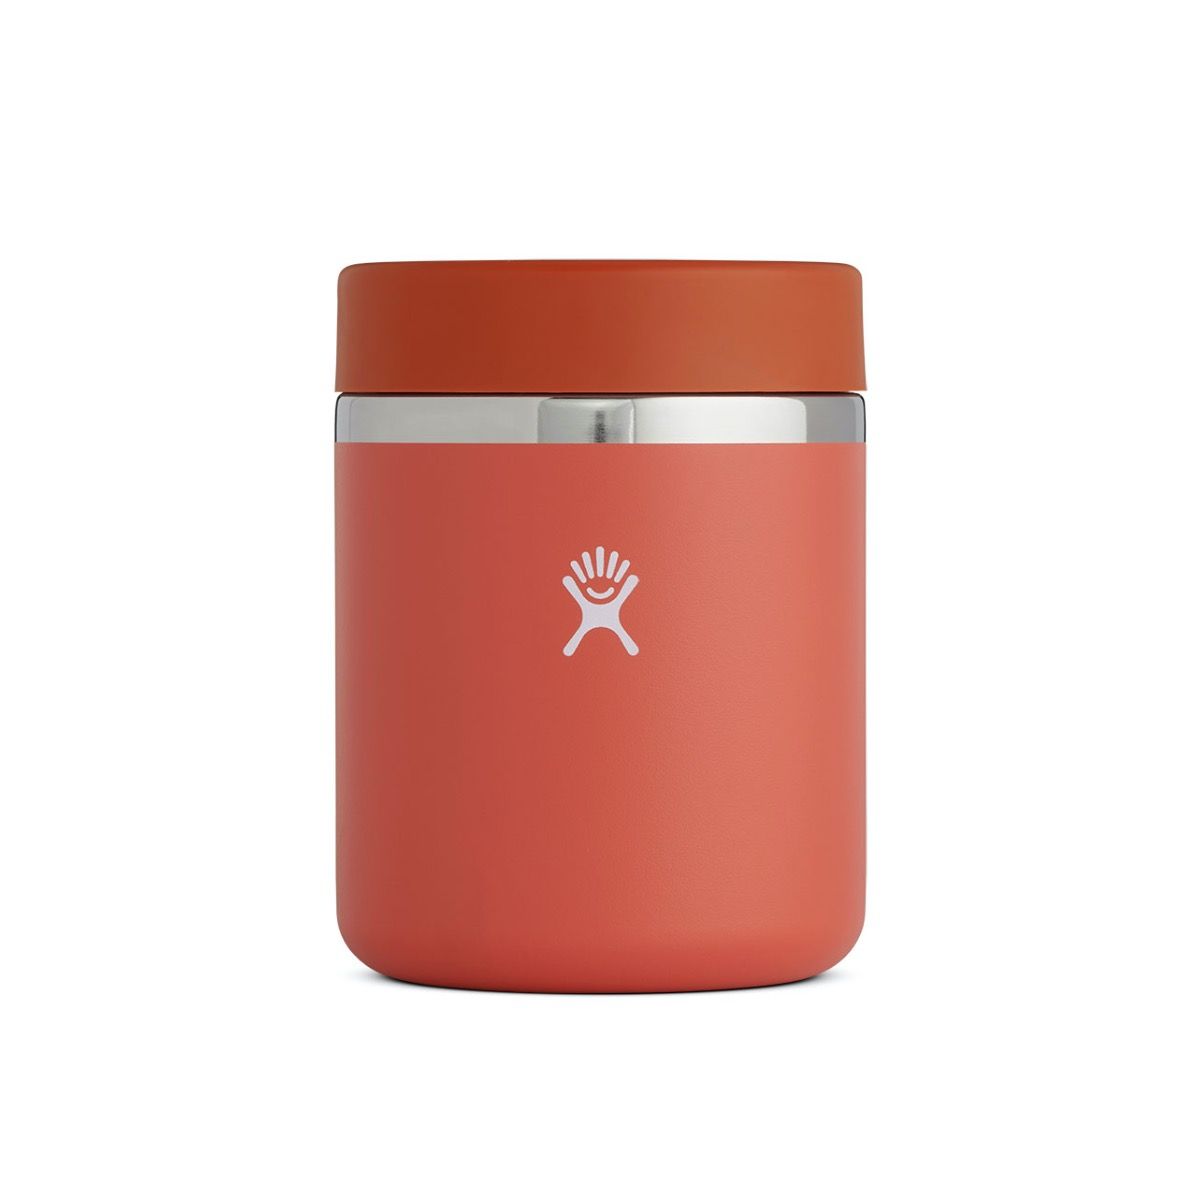 Hydro Flask 20 oz. Insulated Food Jar - Snapper Red